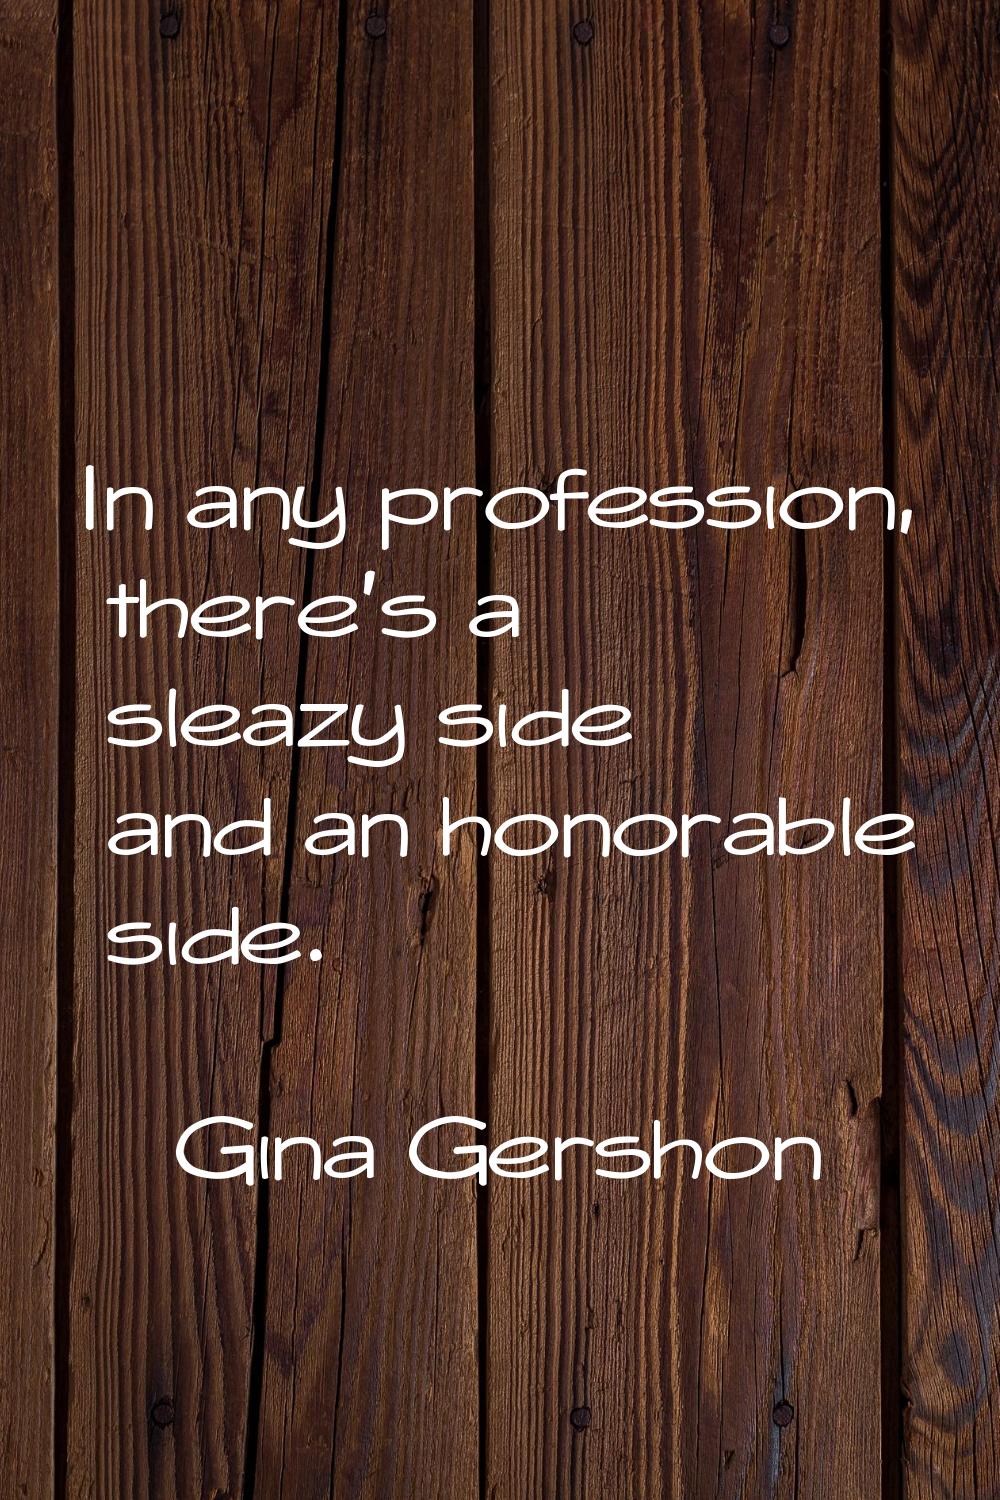 In any profession, there's a sleazy side and an honorable side.